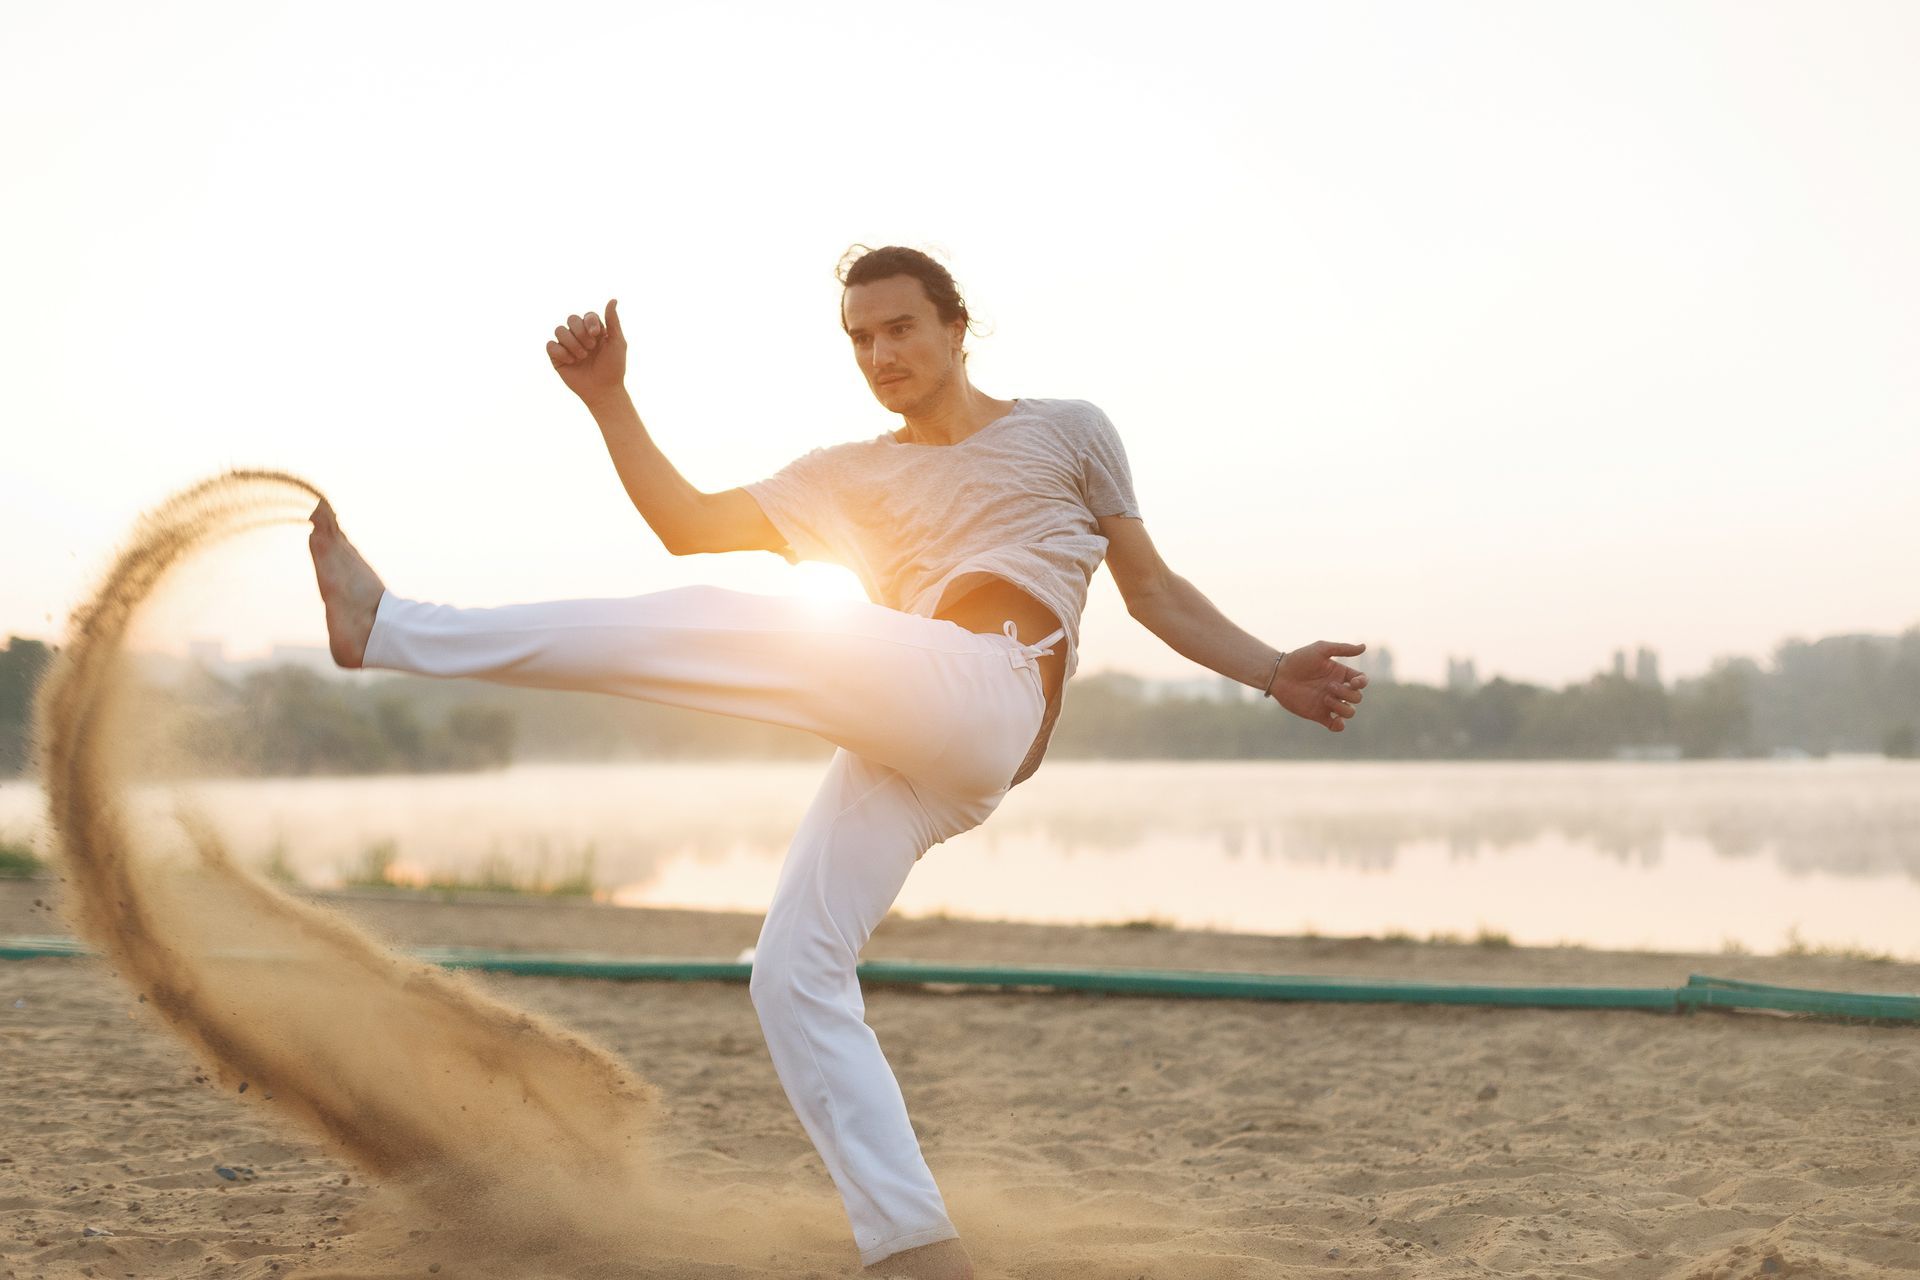 a man in white pants is kicking sand on a beach .